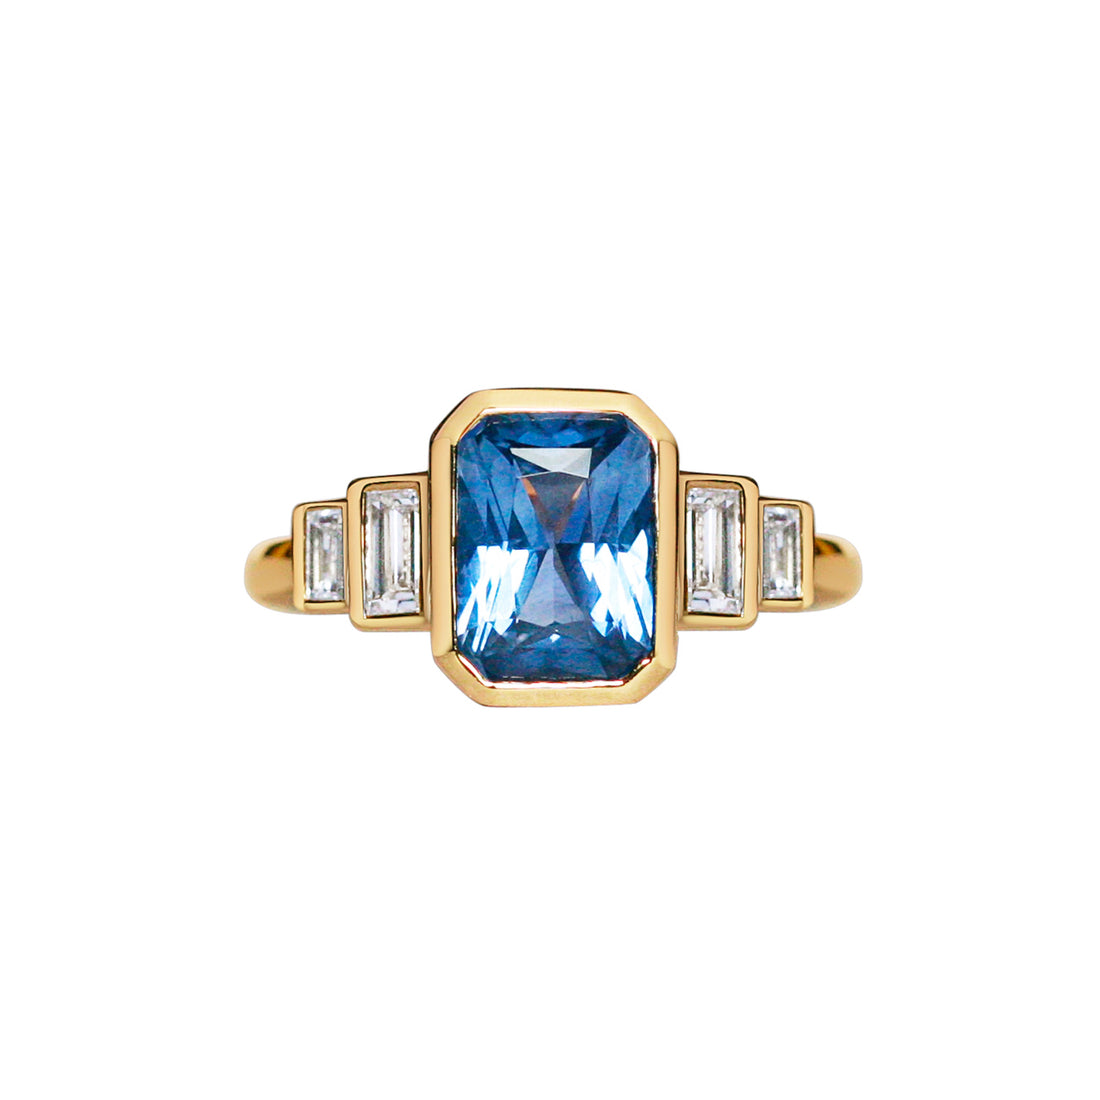  Blue Sapphire & Diamond Deco Ring by Gee Woods | The Cut London